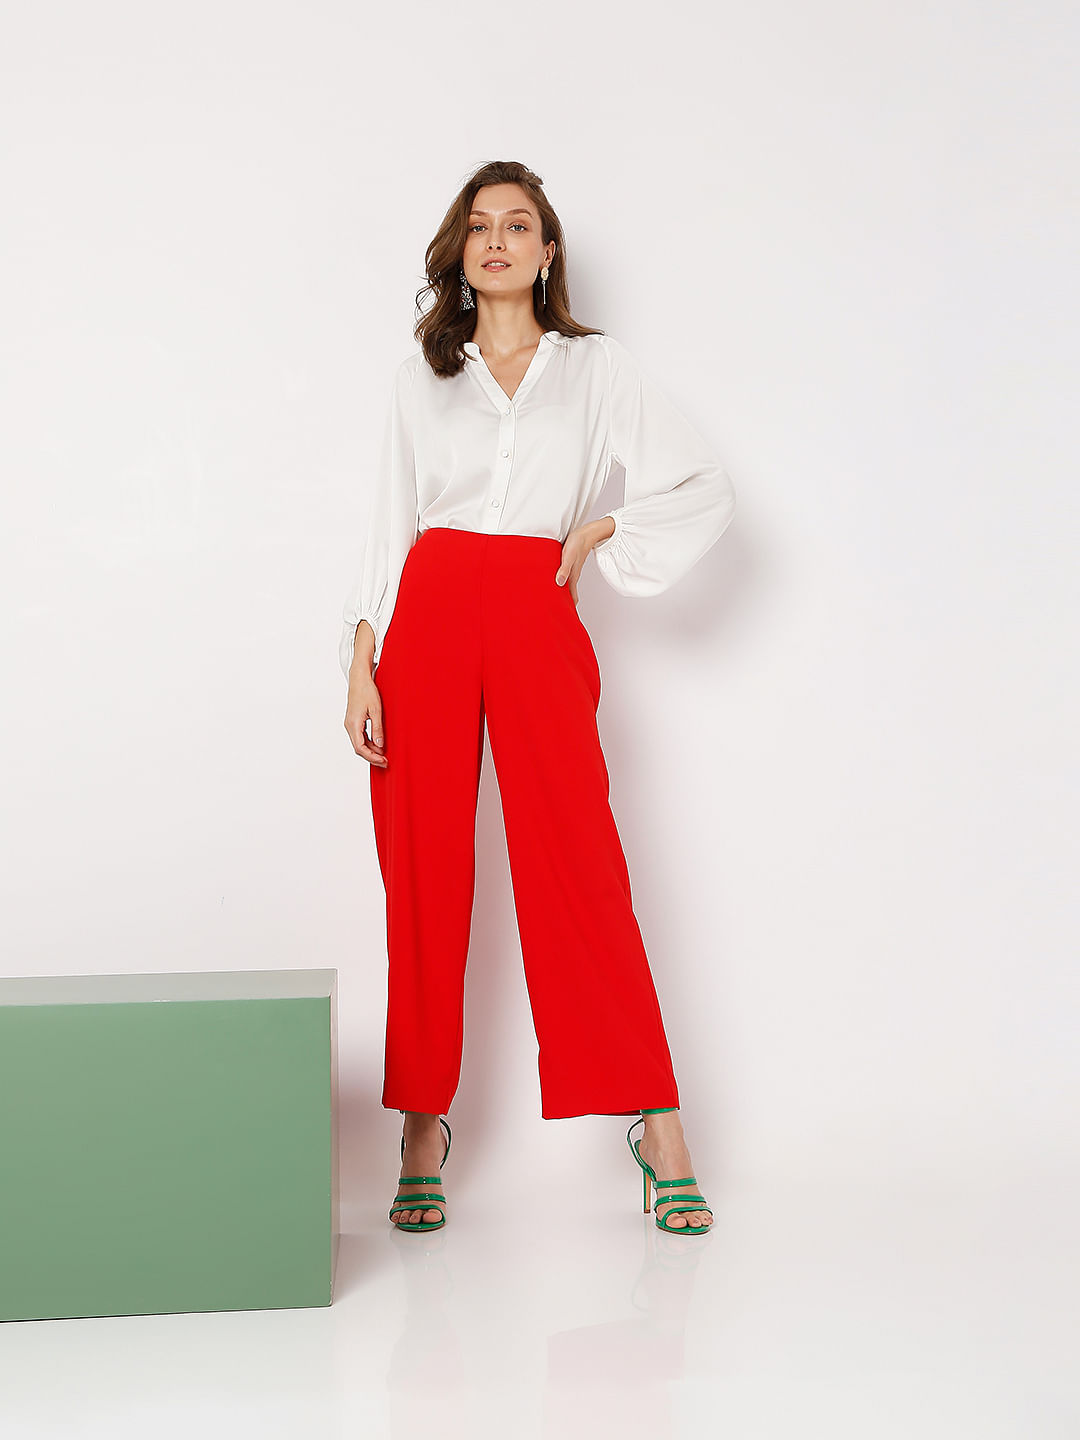 Red Wide Leg Pants  Fall Style  The Hunter Collector  Red wide leg pants  Red pants outfit Red trousers outfit